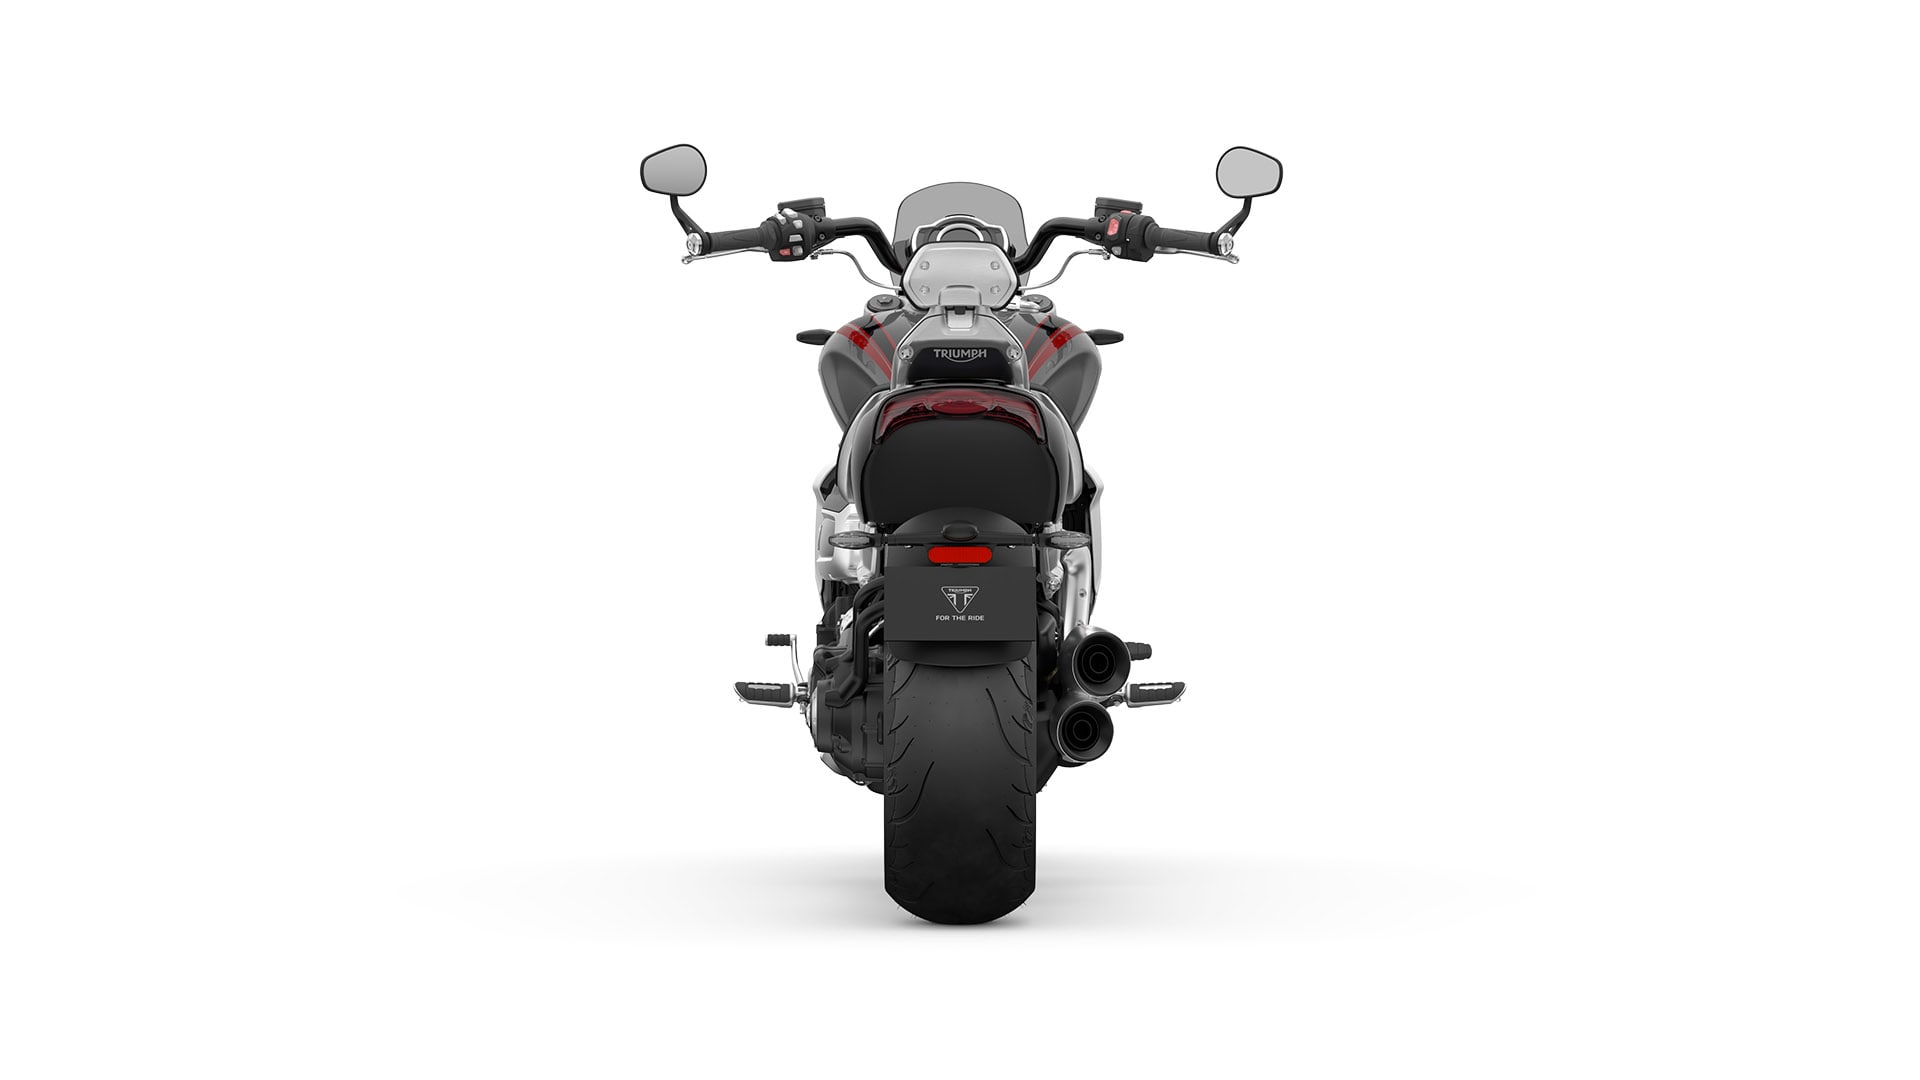 Rear view of the Triumph Rocket 3 GT motorcycle in Silver Ice and storm grey CGI